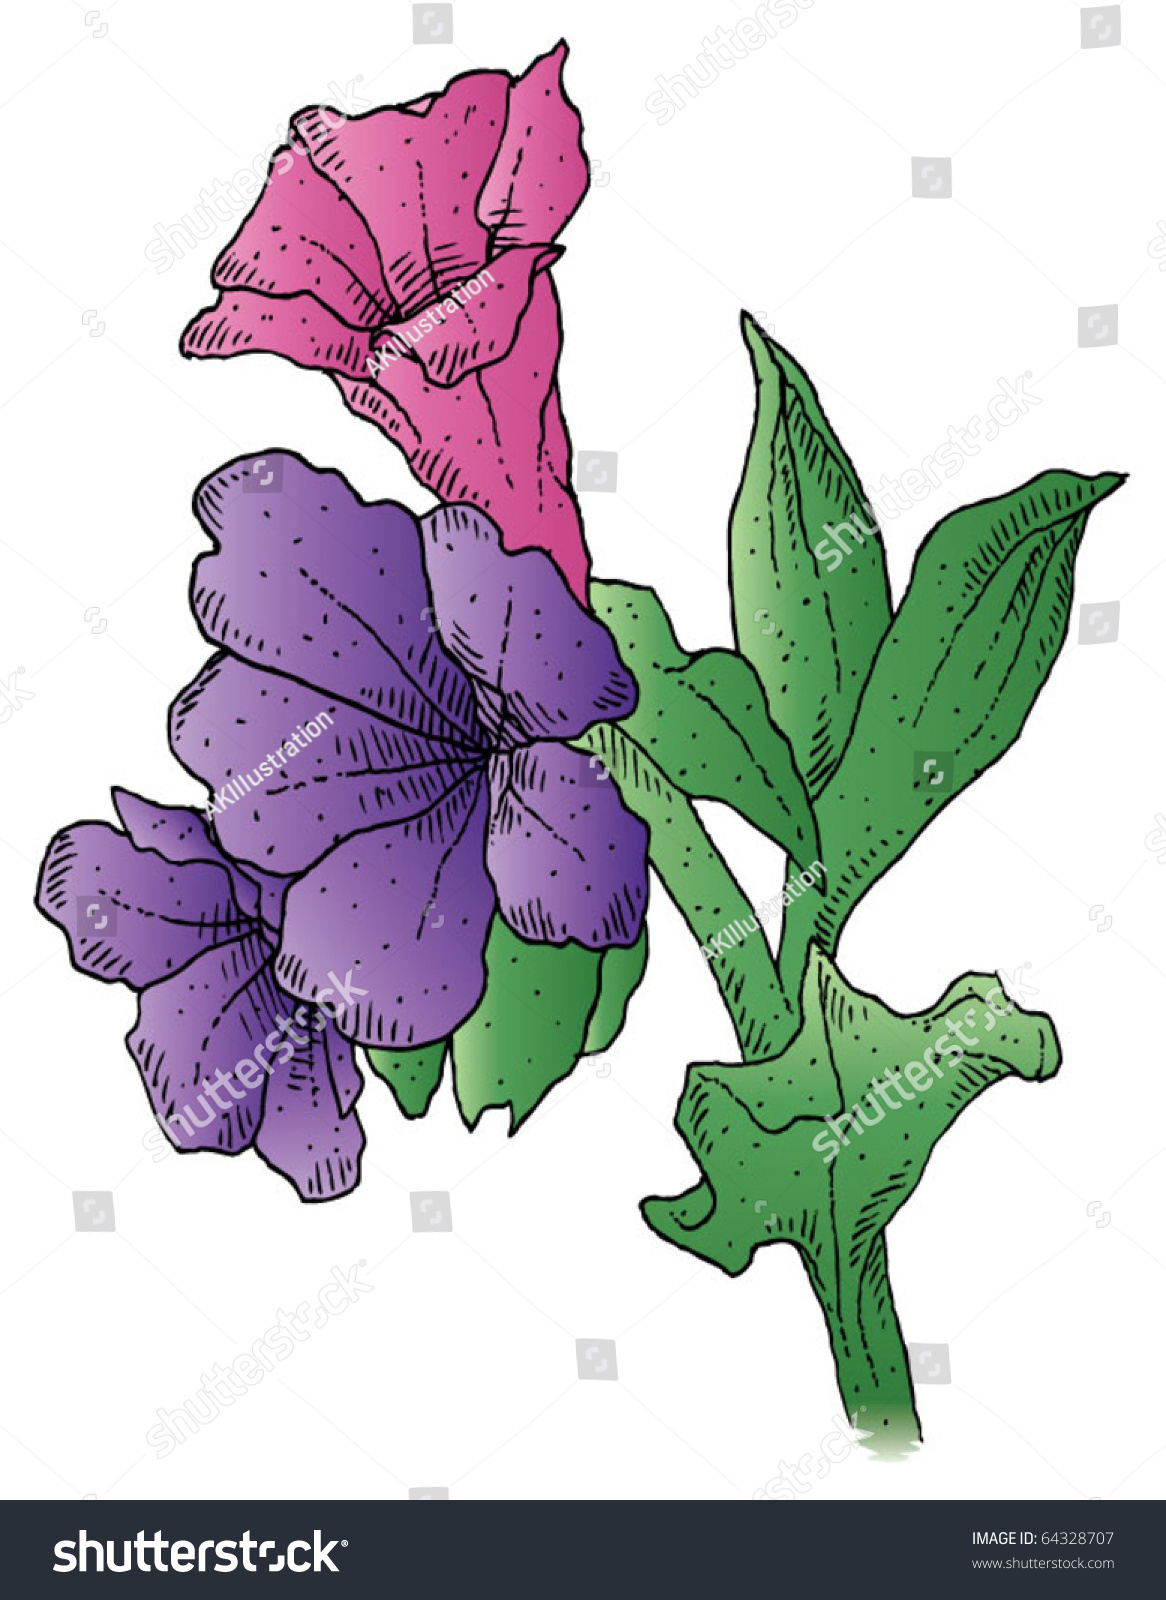 A Hand-Drawn Ink Vector Of A Smoky Blue Lungwort. - 64328707 : Shutterstock